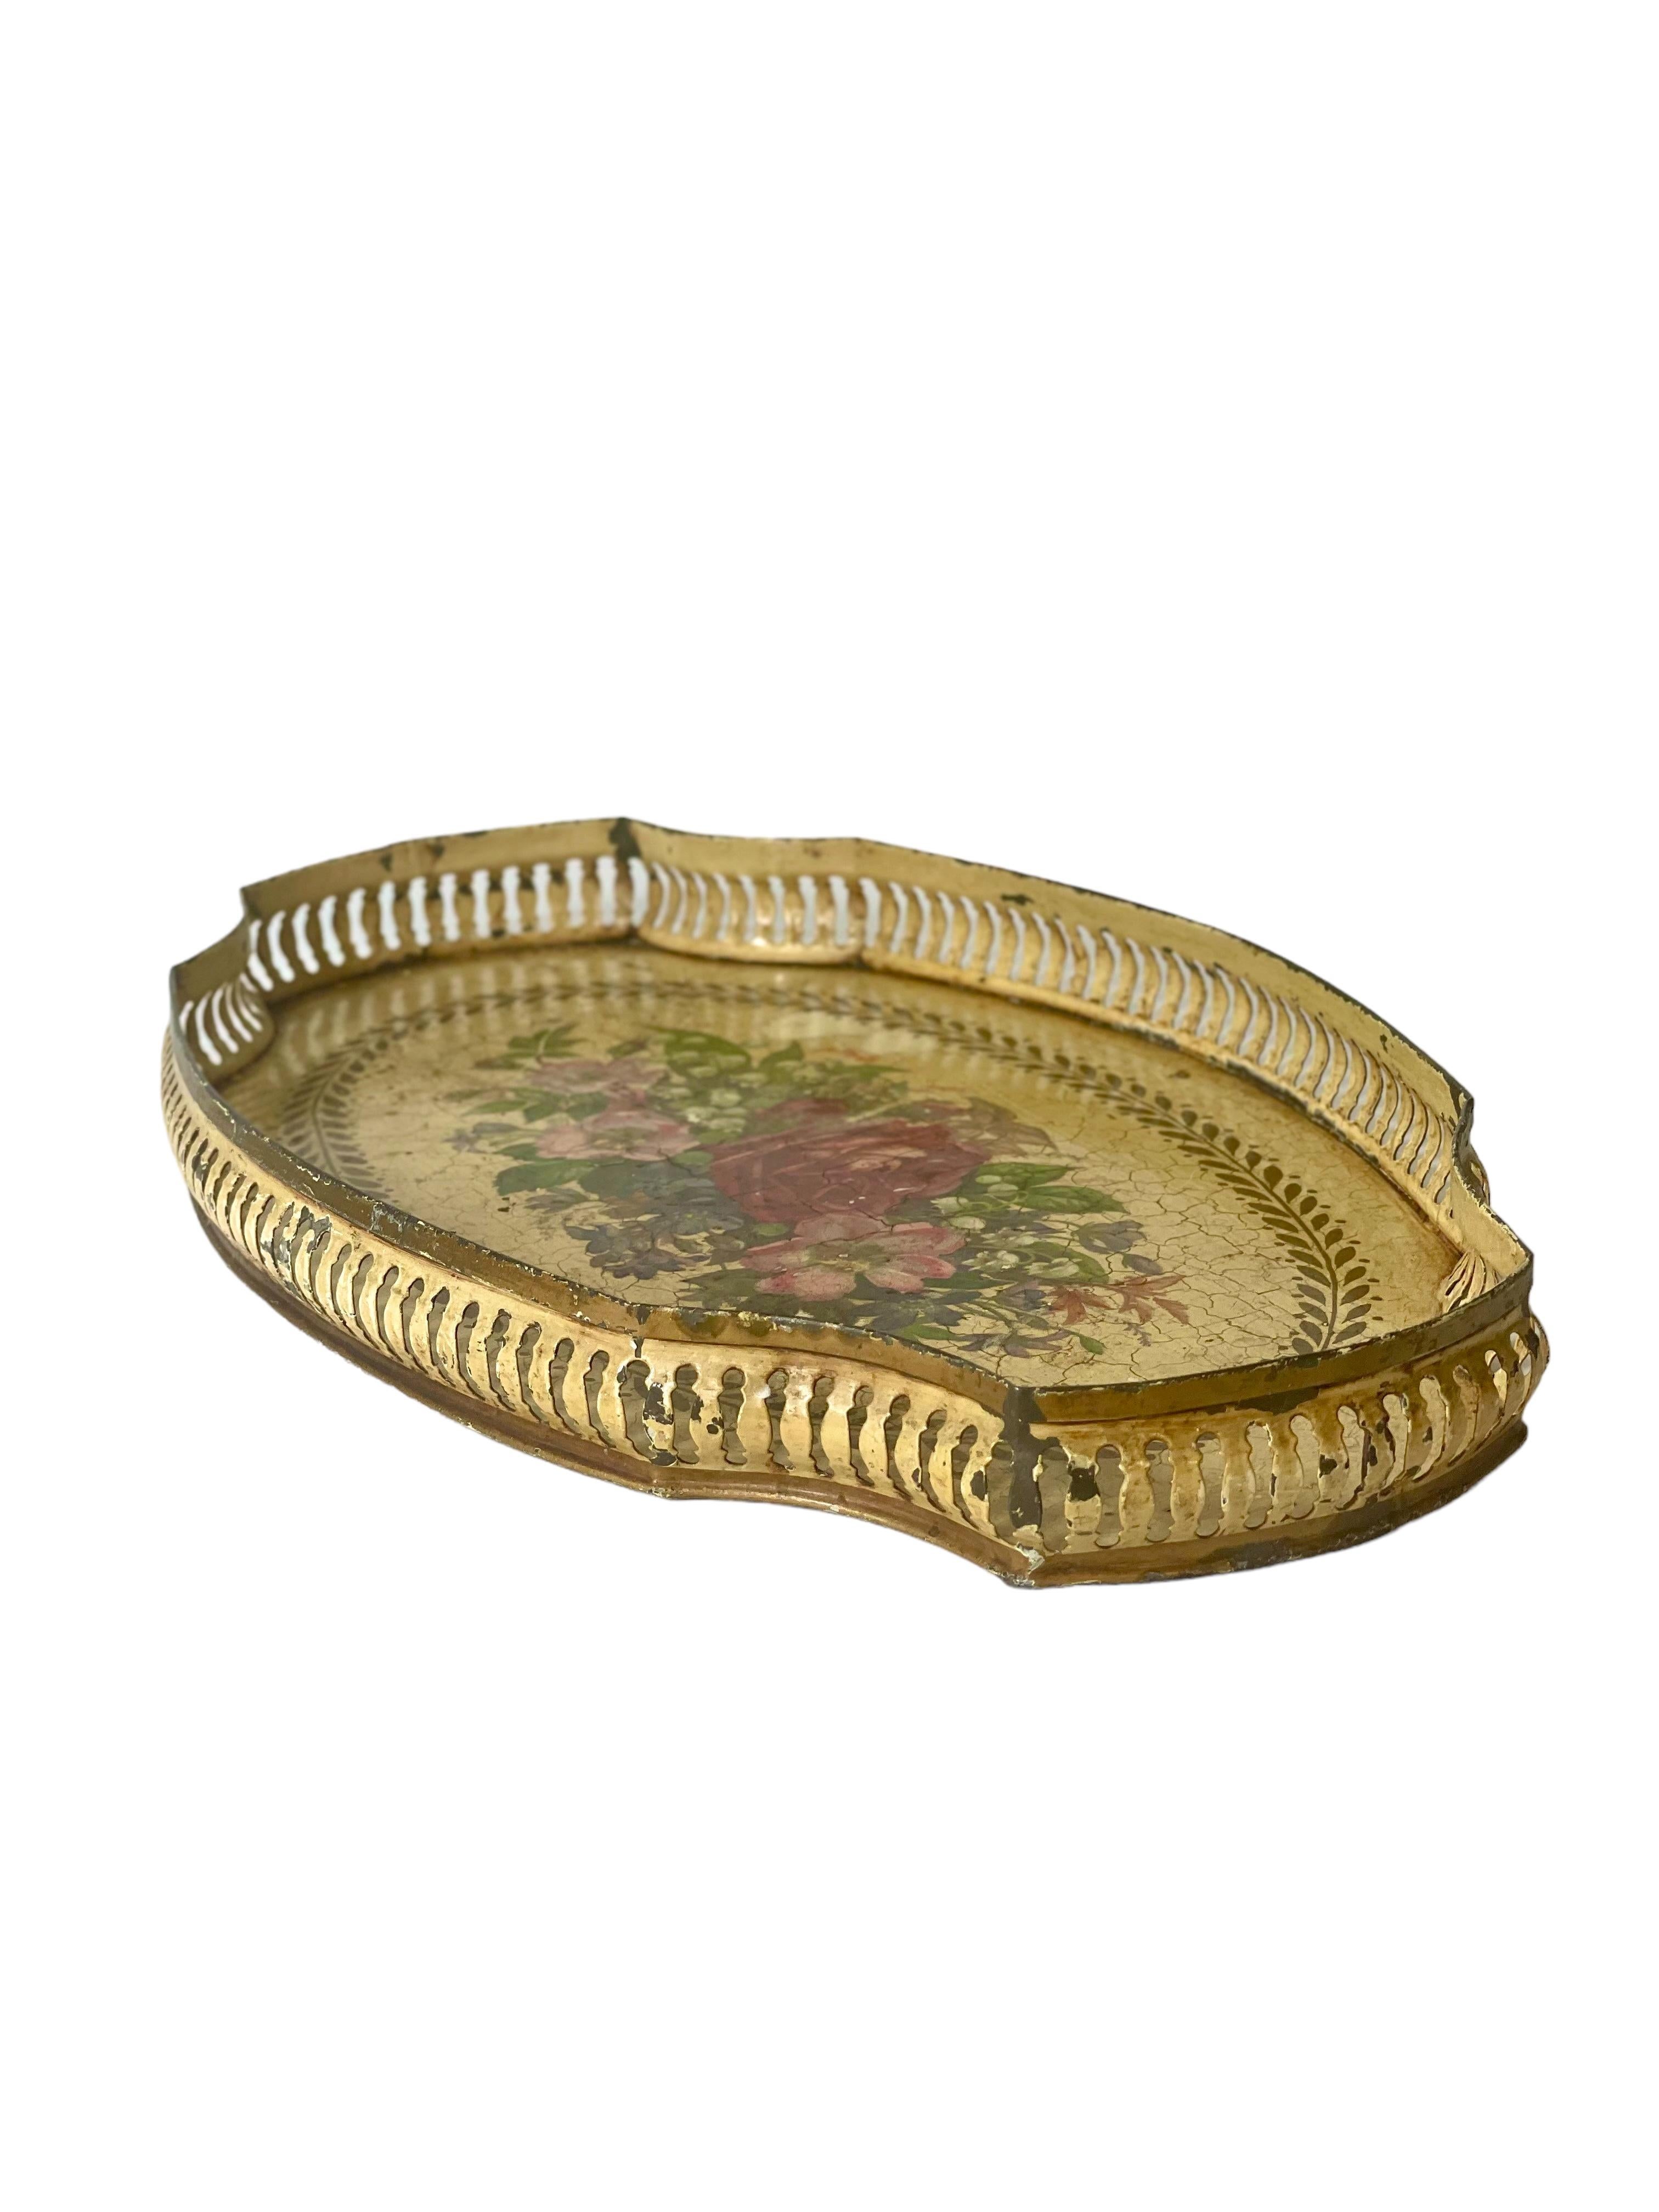 A very charming antique toleware tin tray, beautifully hand-painted with sprays of wild roses and a laurel frieze. The tradition of applying paint and lacquer to tin in this style began as a way of preventing everyday and household objects from